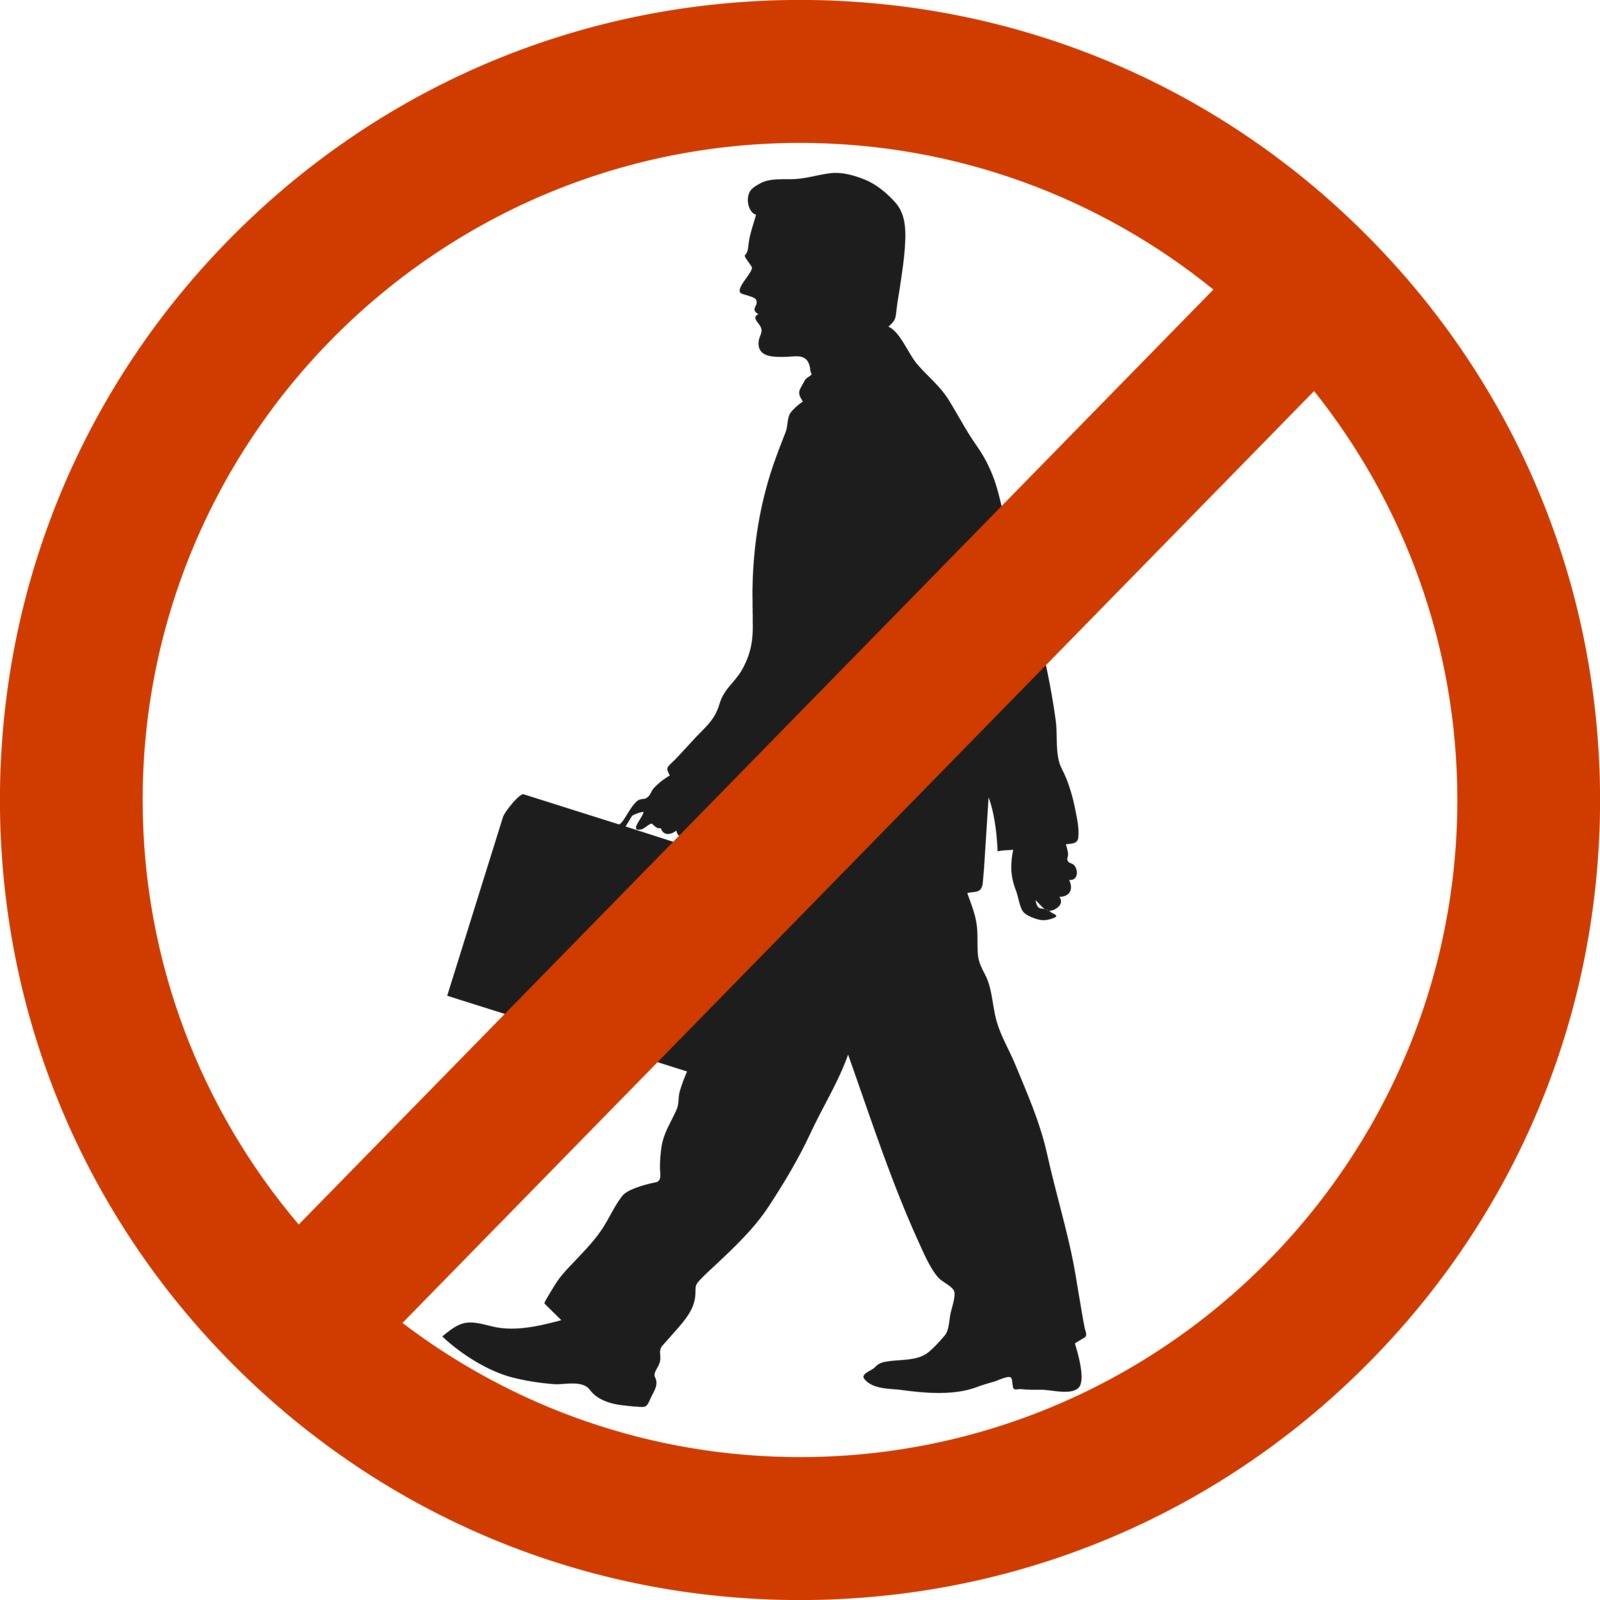 entrance and access is denied to men. sign symbol